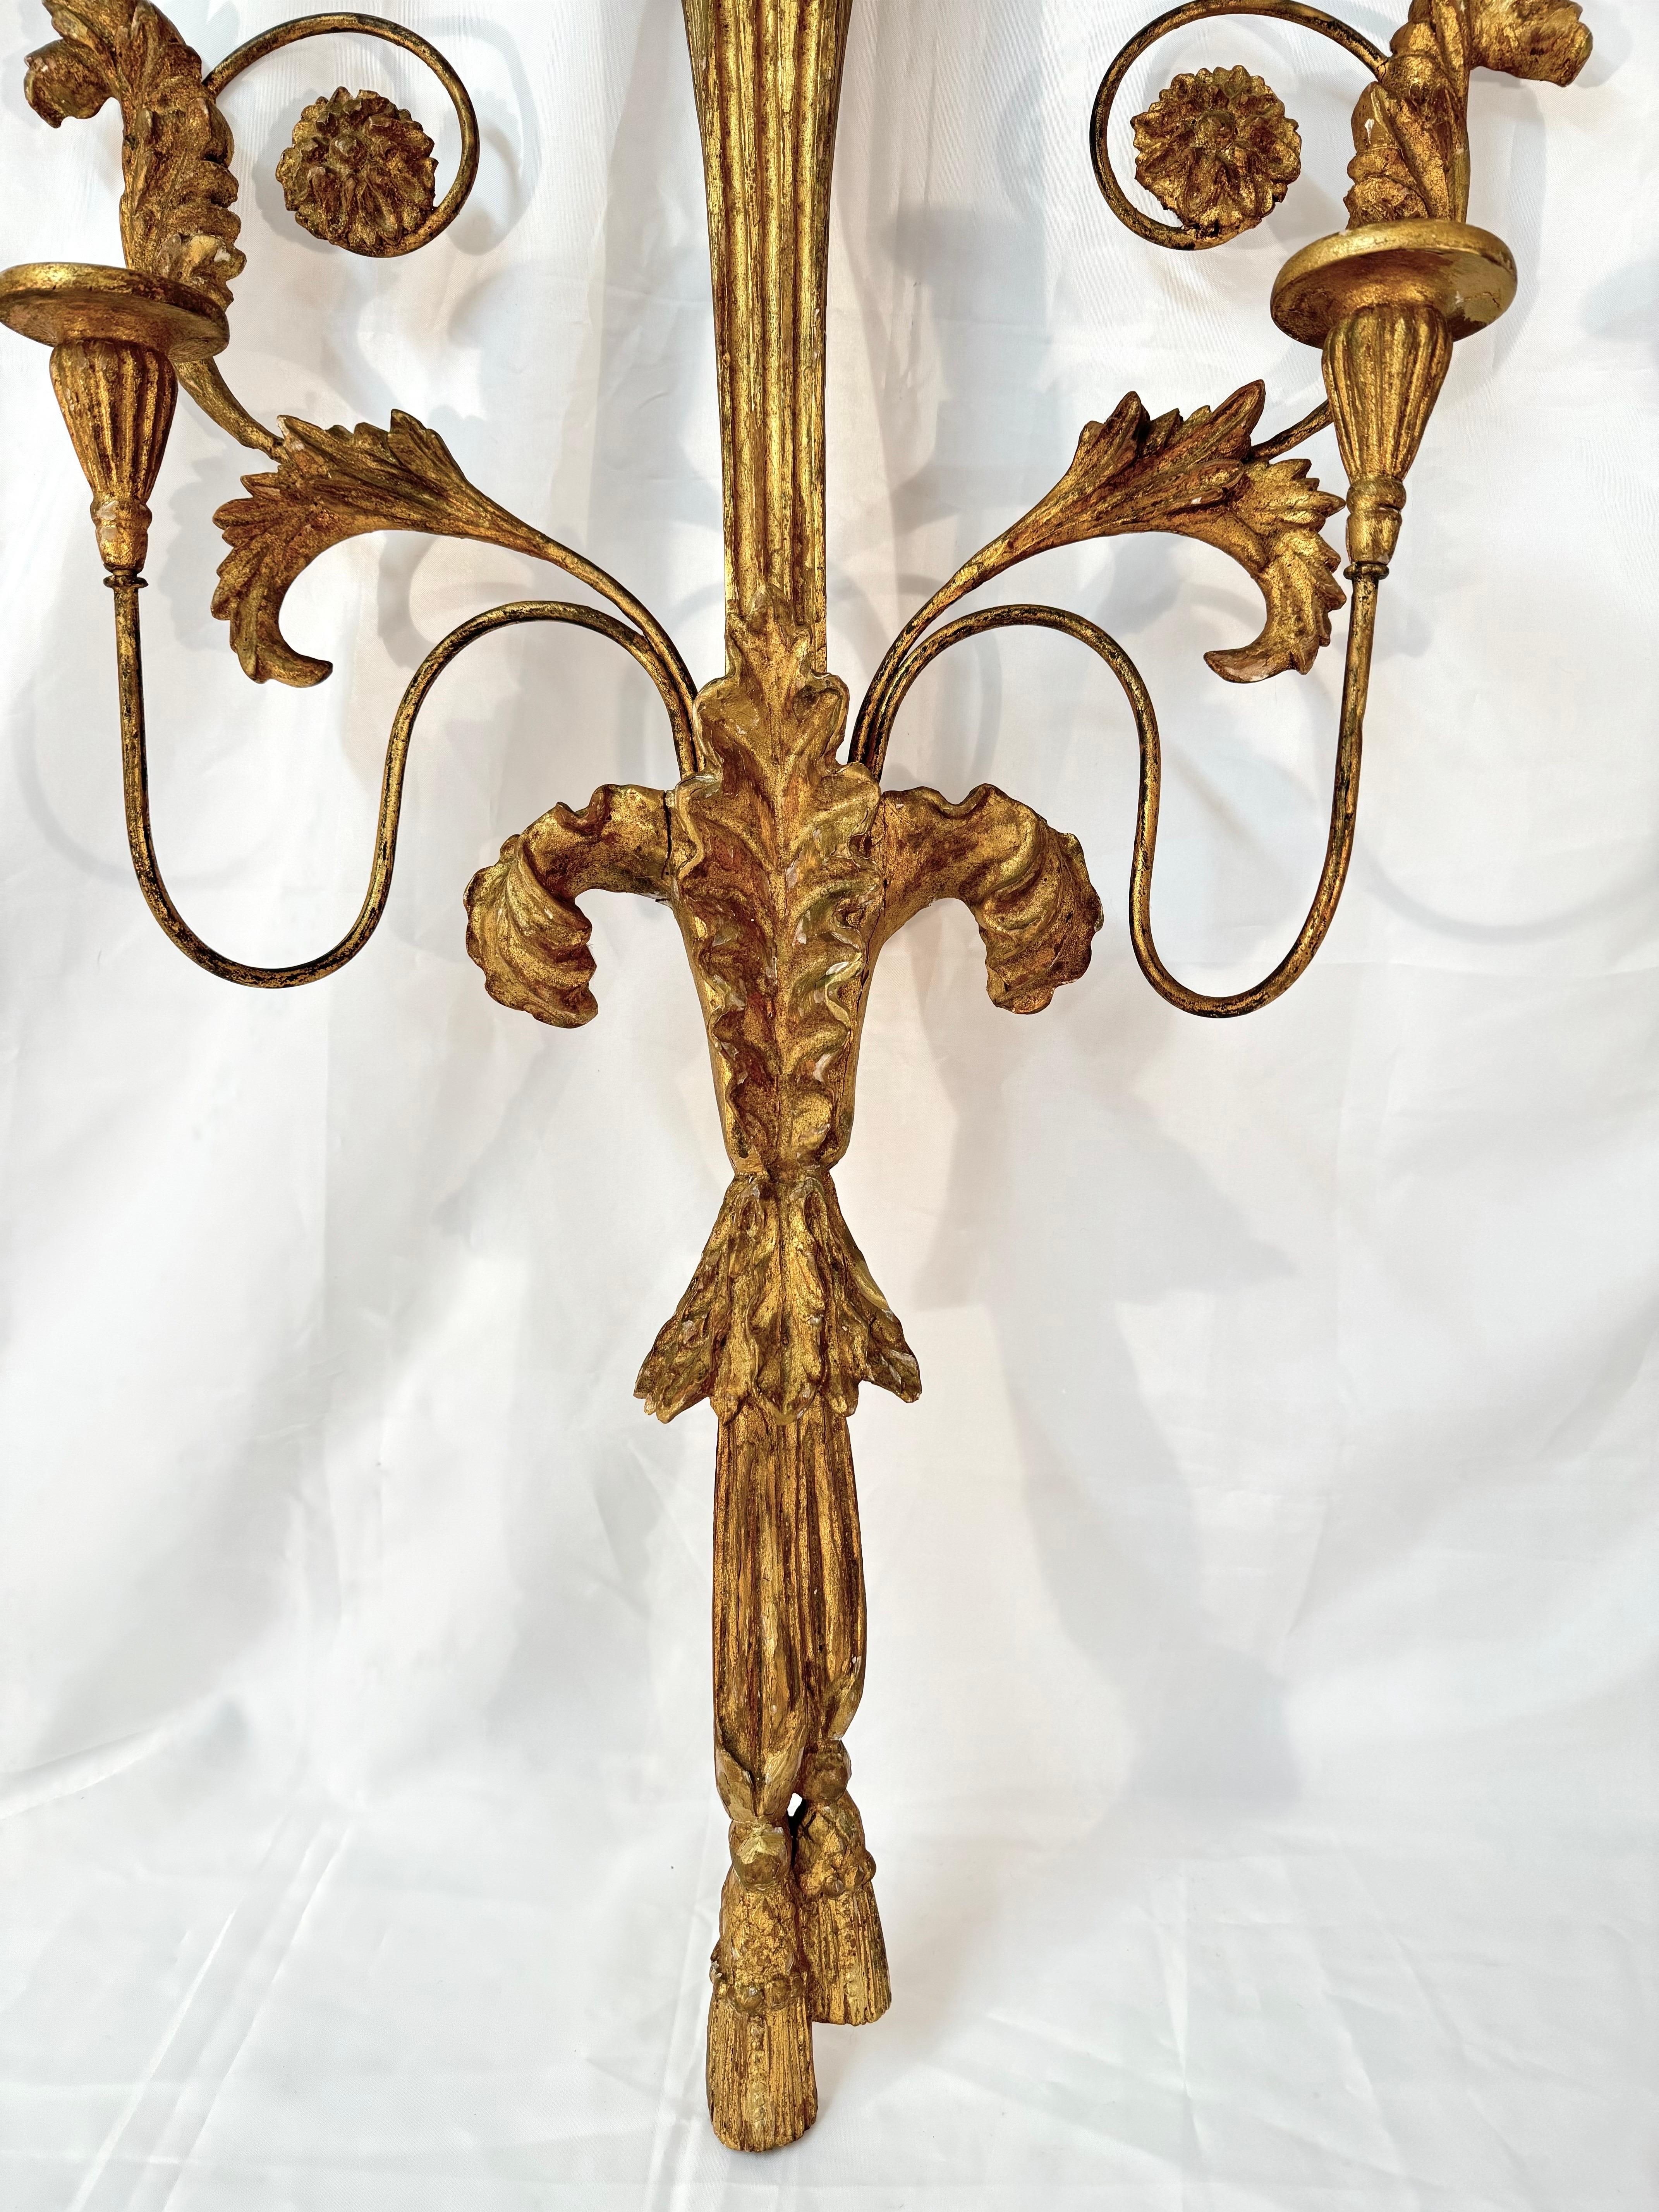 Large Neoclassical Gilt Wooden Eagle Sconce For Sale 2